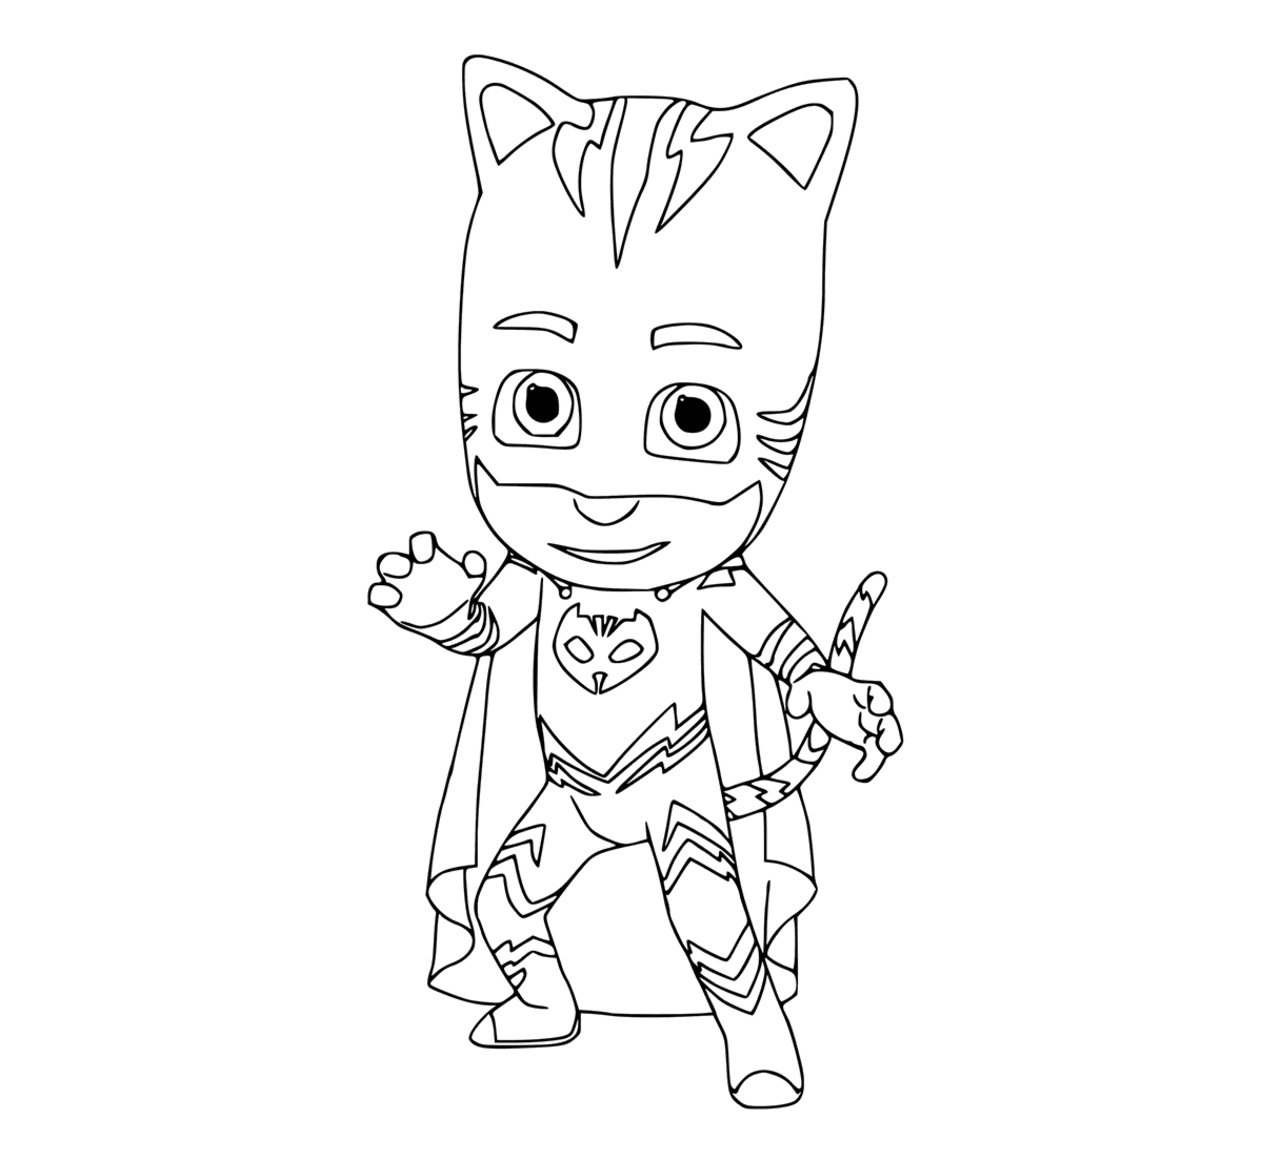 Coloriage Pijamask Beau Photos Pj Masks Coloring Pages to and Print for Free